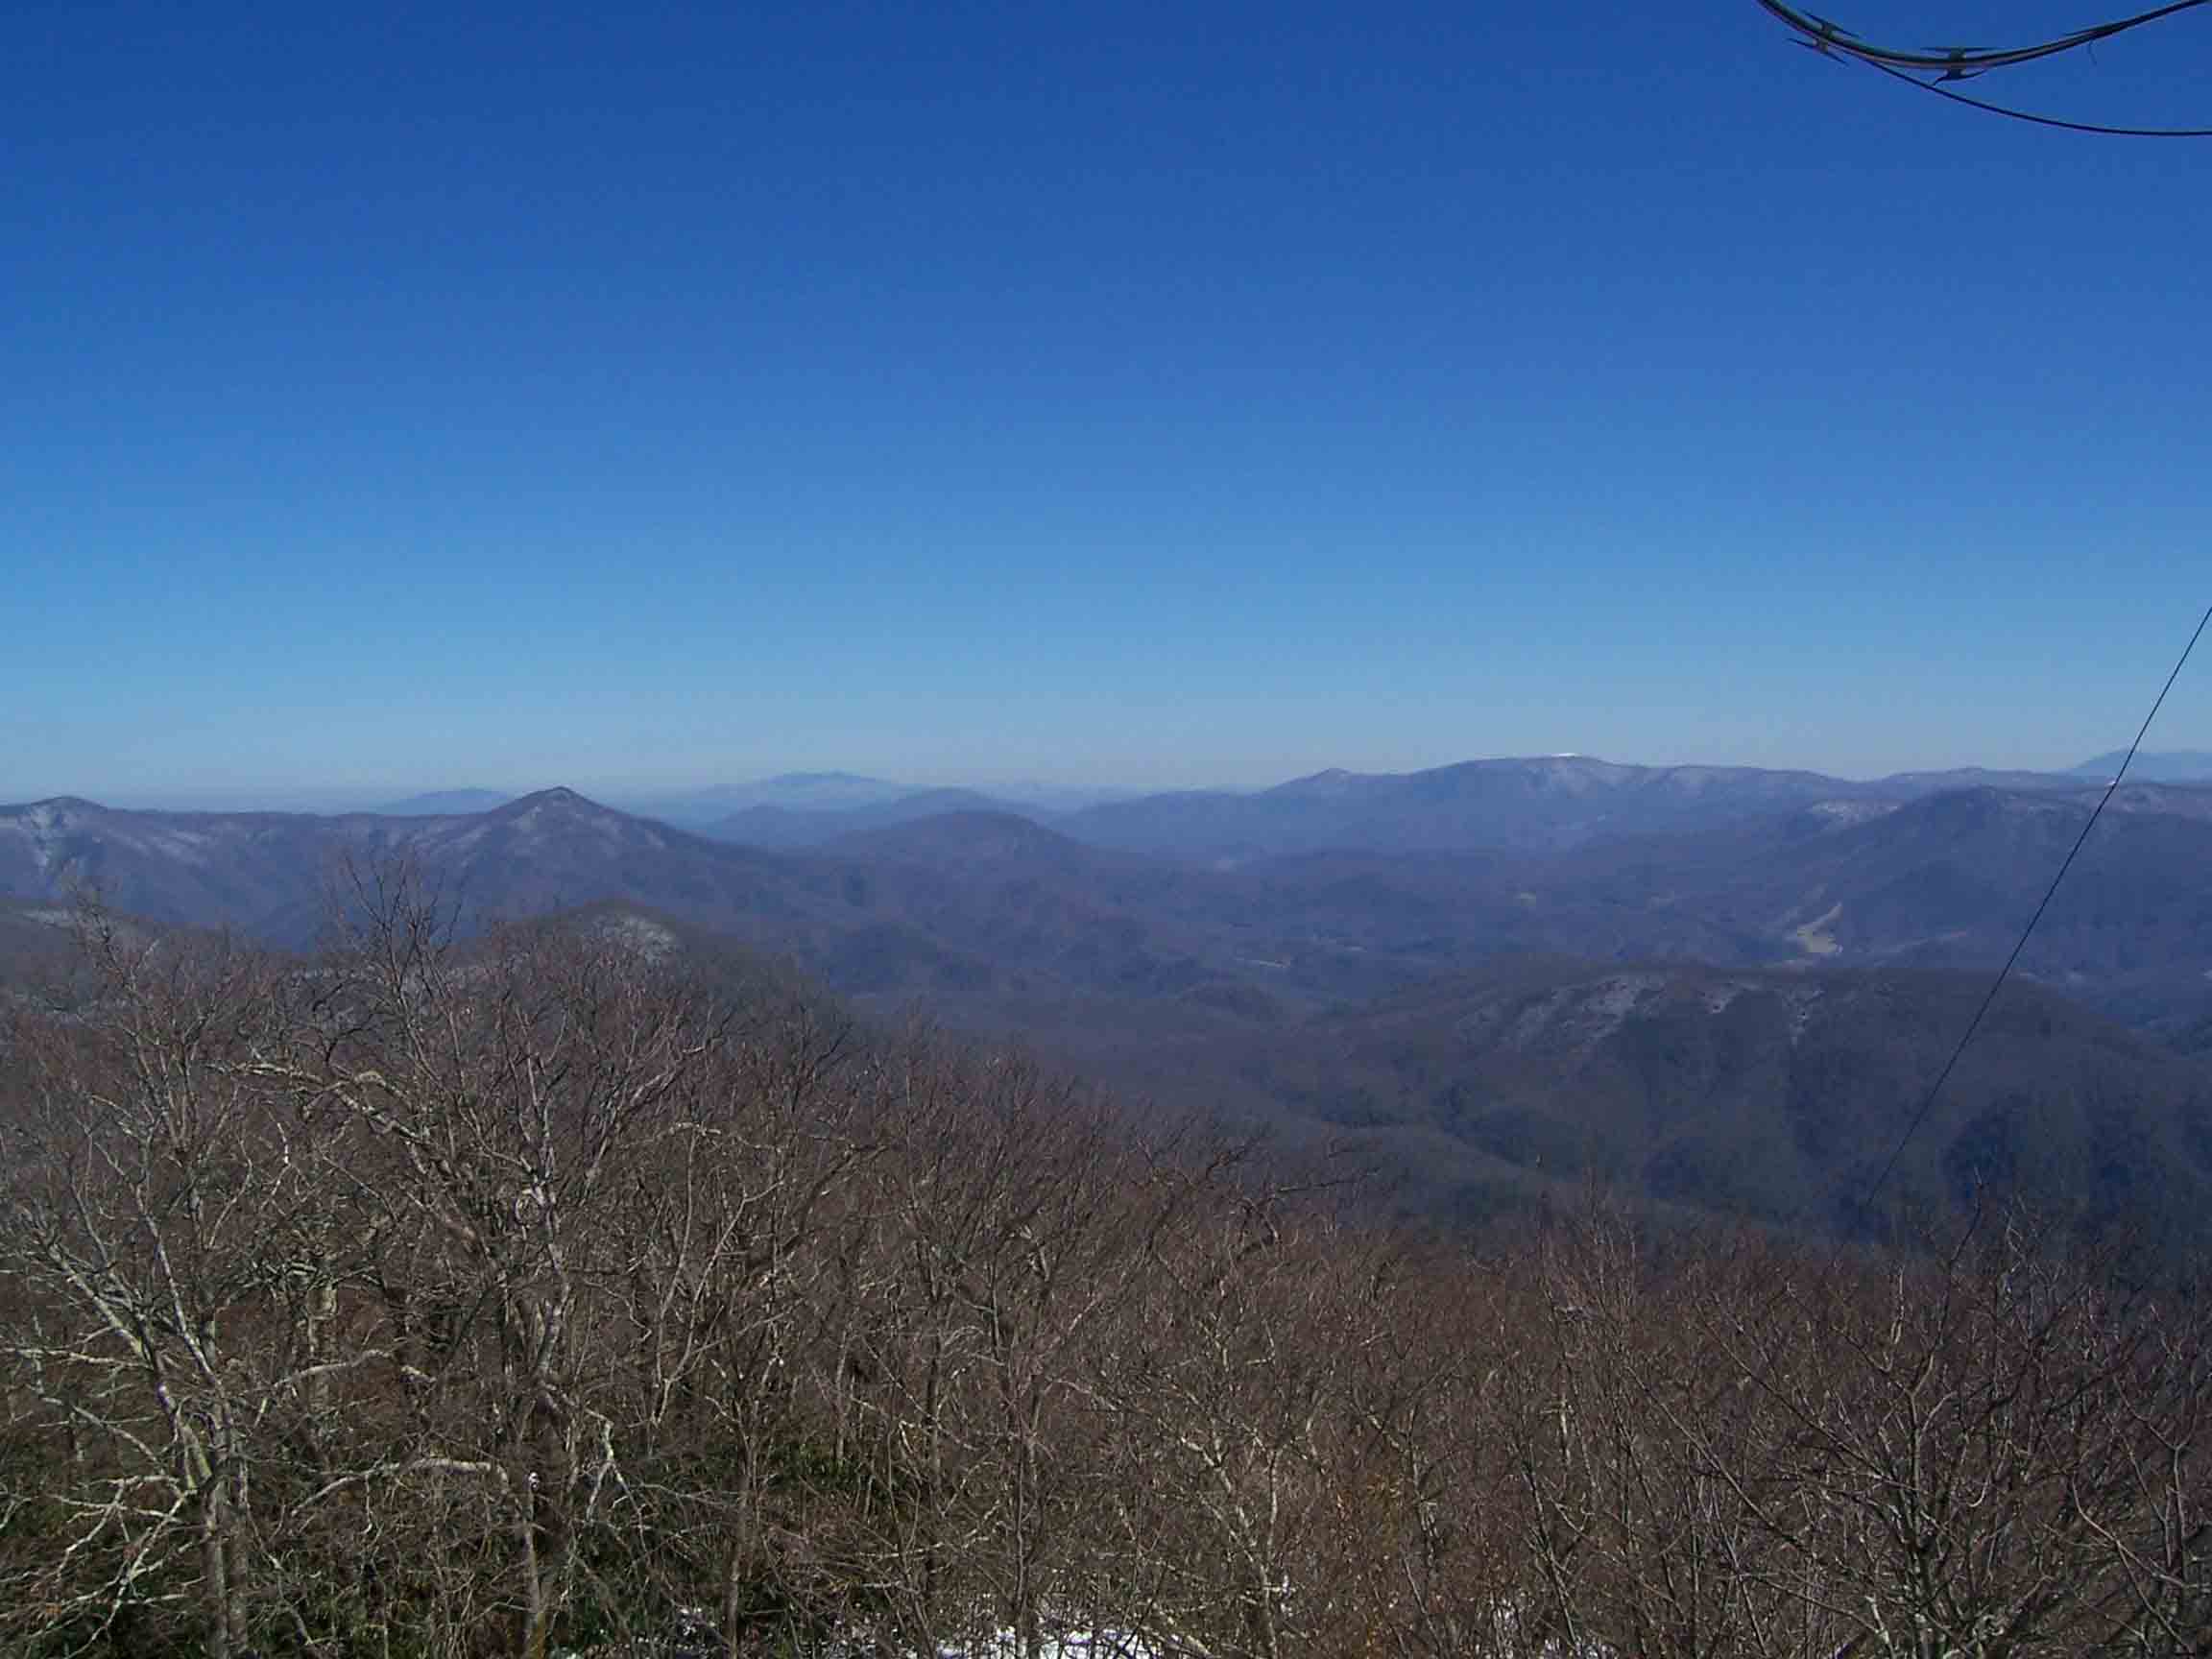 mm 14.1 - Taken from Camp Creek Bald, this pic shows the AT route over Big Butt, past Devils Fork Gap, over Big Bald, No Business Knob, Temple Hill, Unaka and Roan Highlands in the distance. Courtesy willey54@yahoo.com